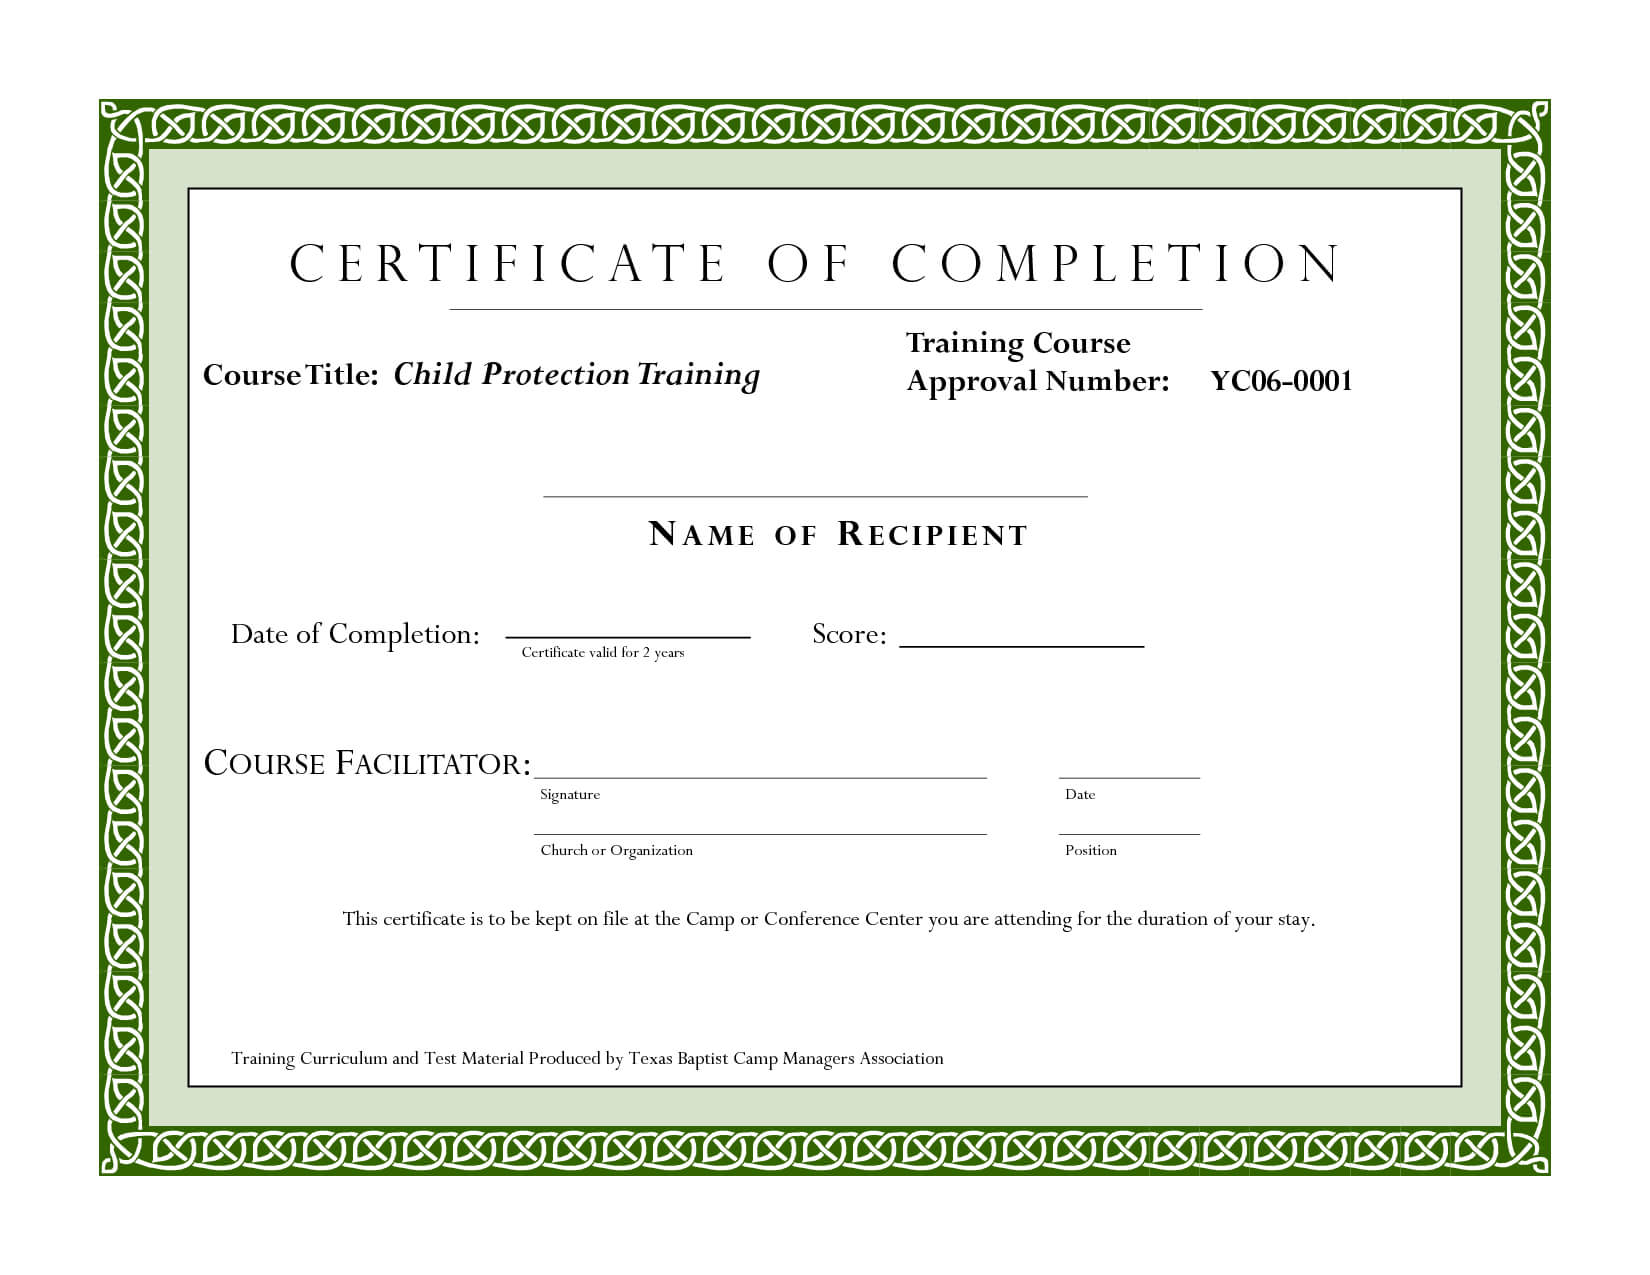 Course Completion Certificate Template | Certificate Of Regarding Certification Of Completion Template